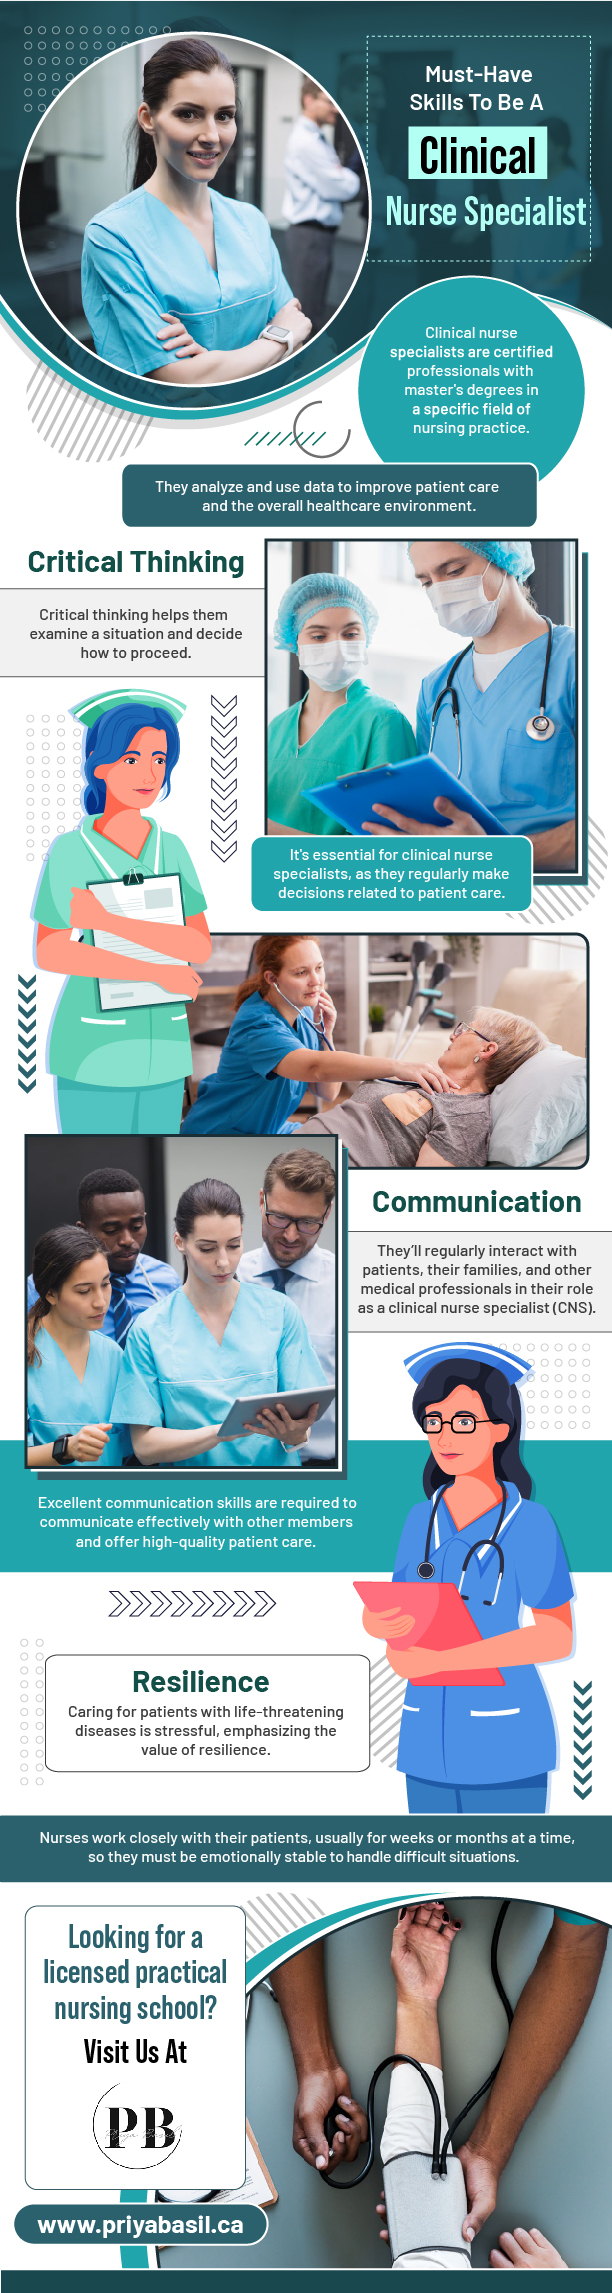 Must-Have Skills To Be a Clinical Nurse Specialist - Infograph